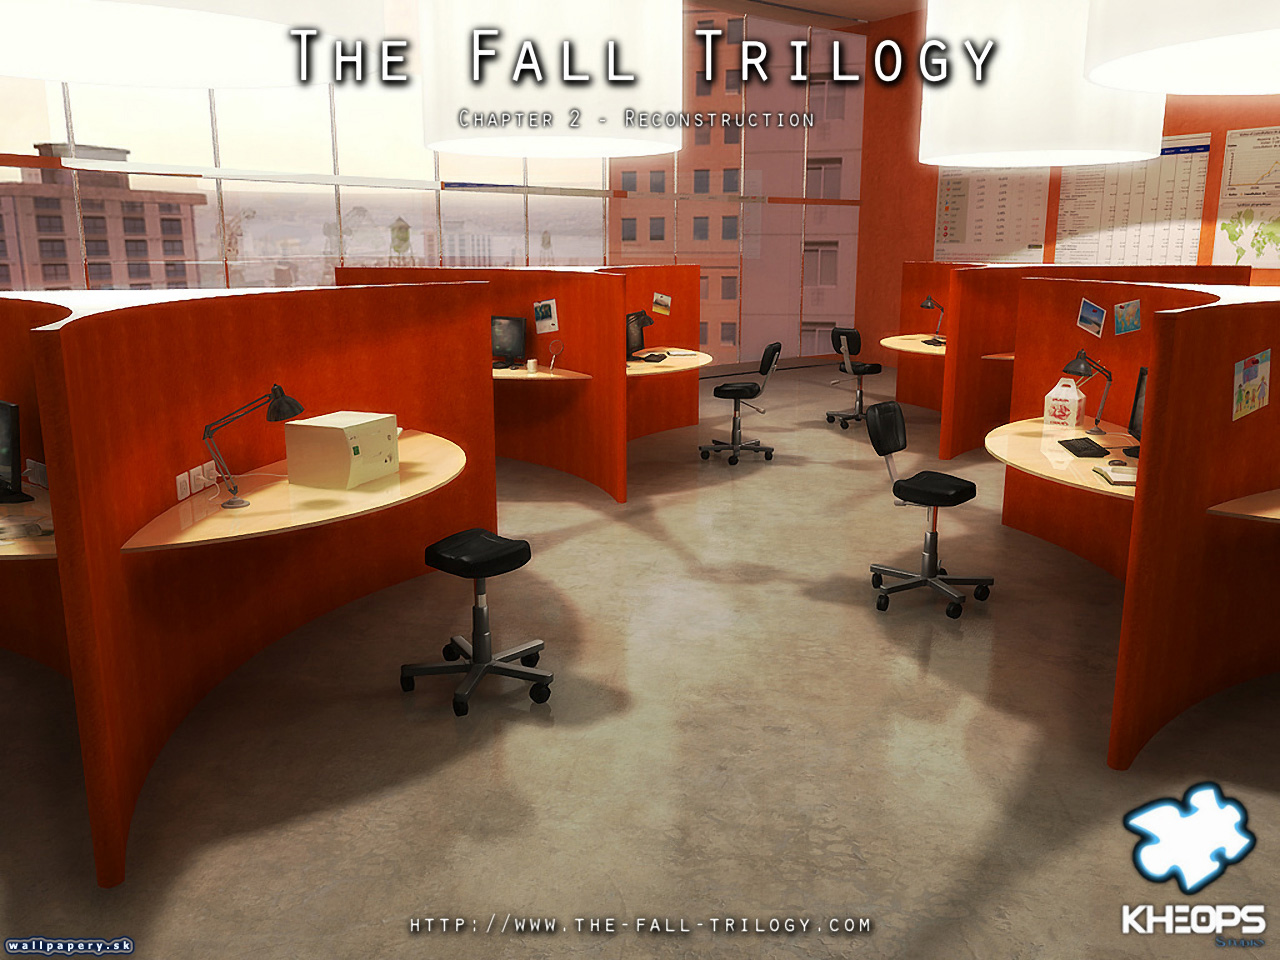 The Fall Trilogy - Chapter 2: Reconstruction - wallpaper 11